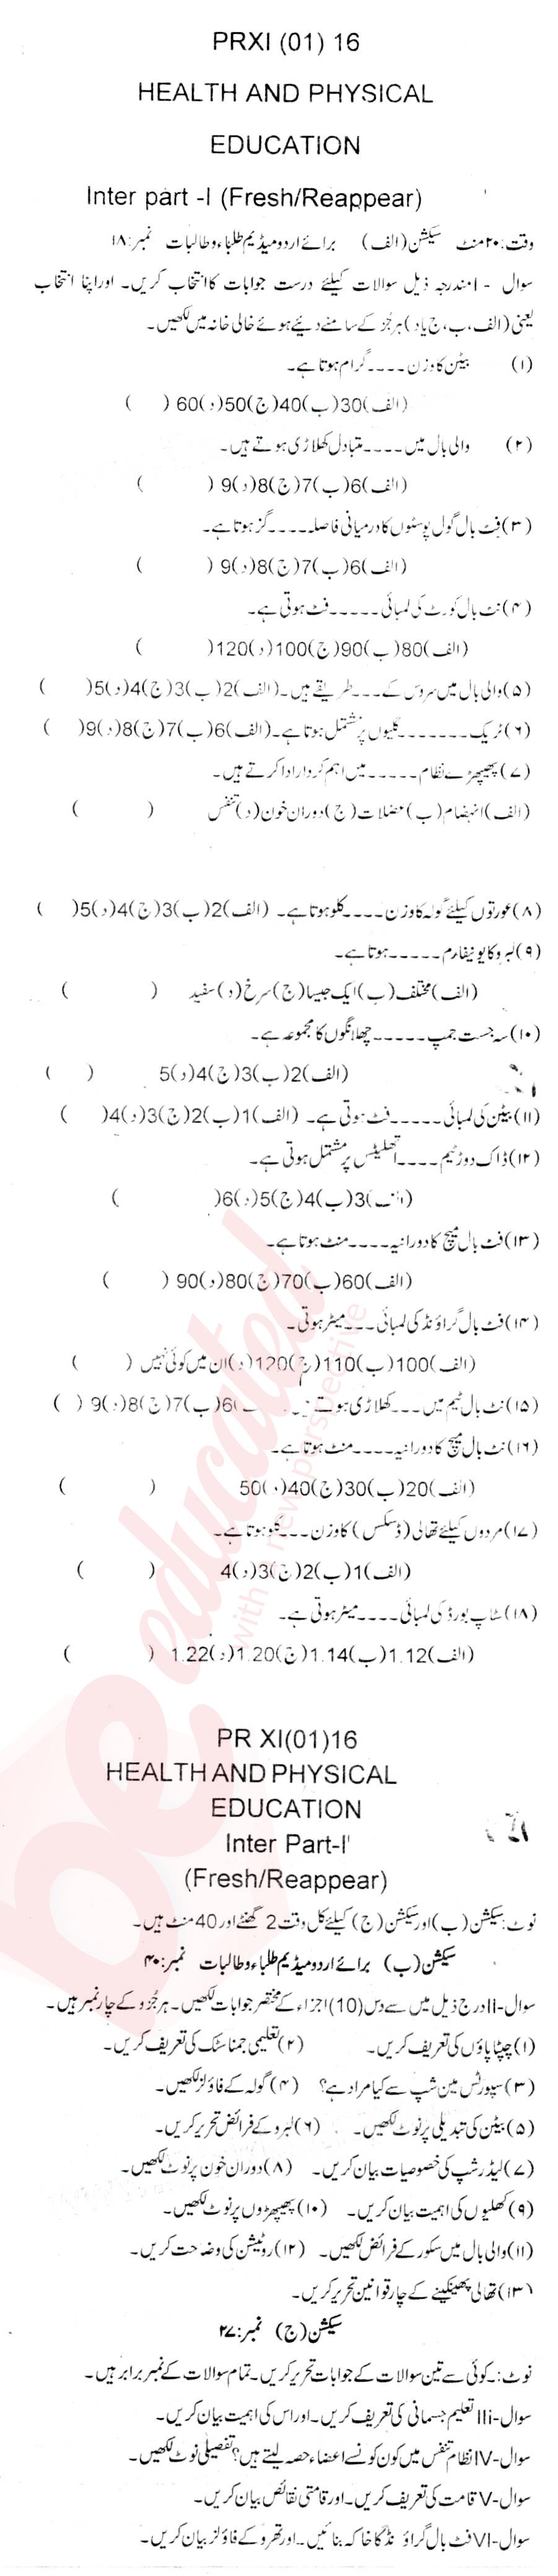 Health and Physical Education FA Part 1 Past Paper Group 1 BISE Bannu 2016